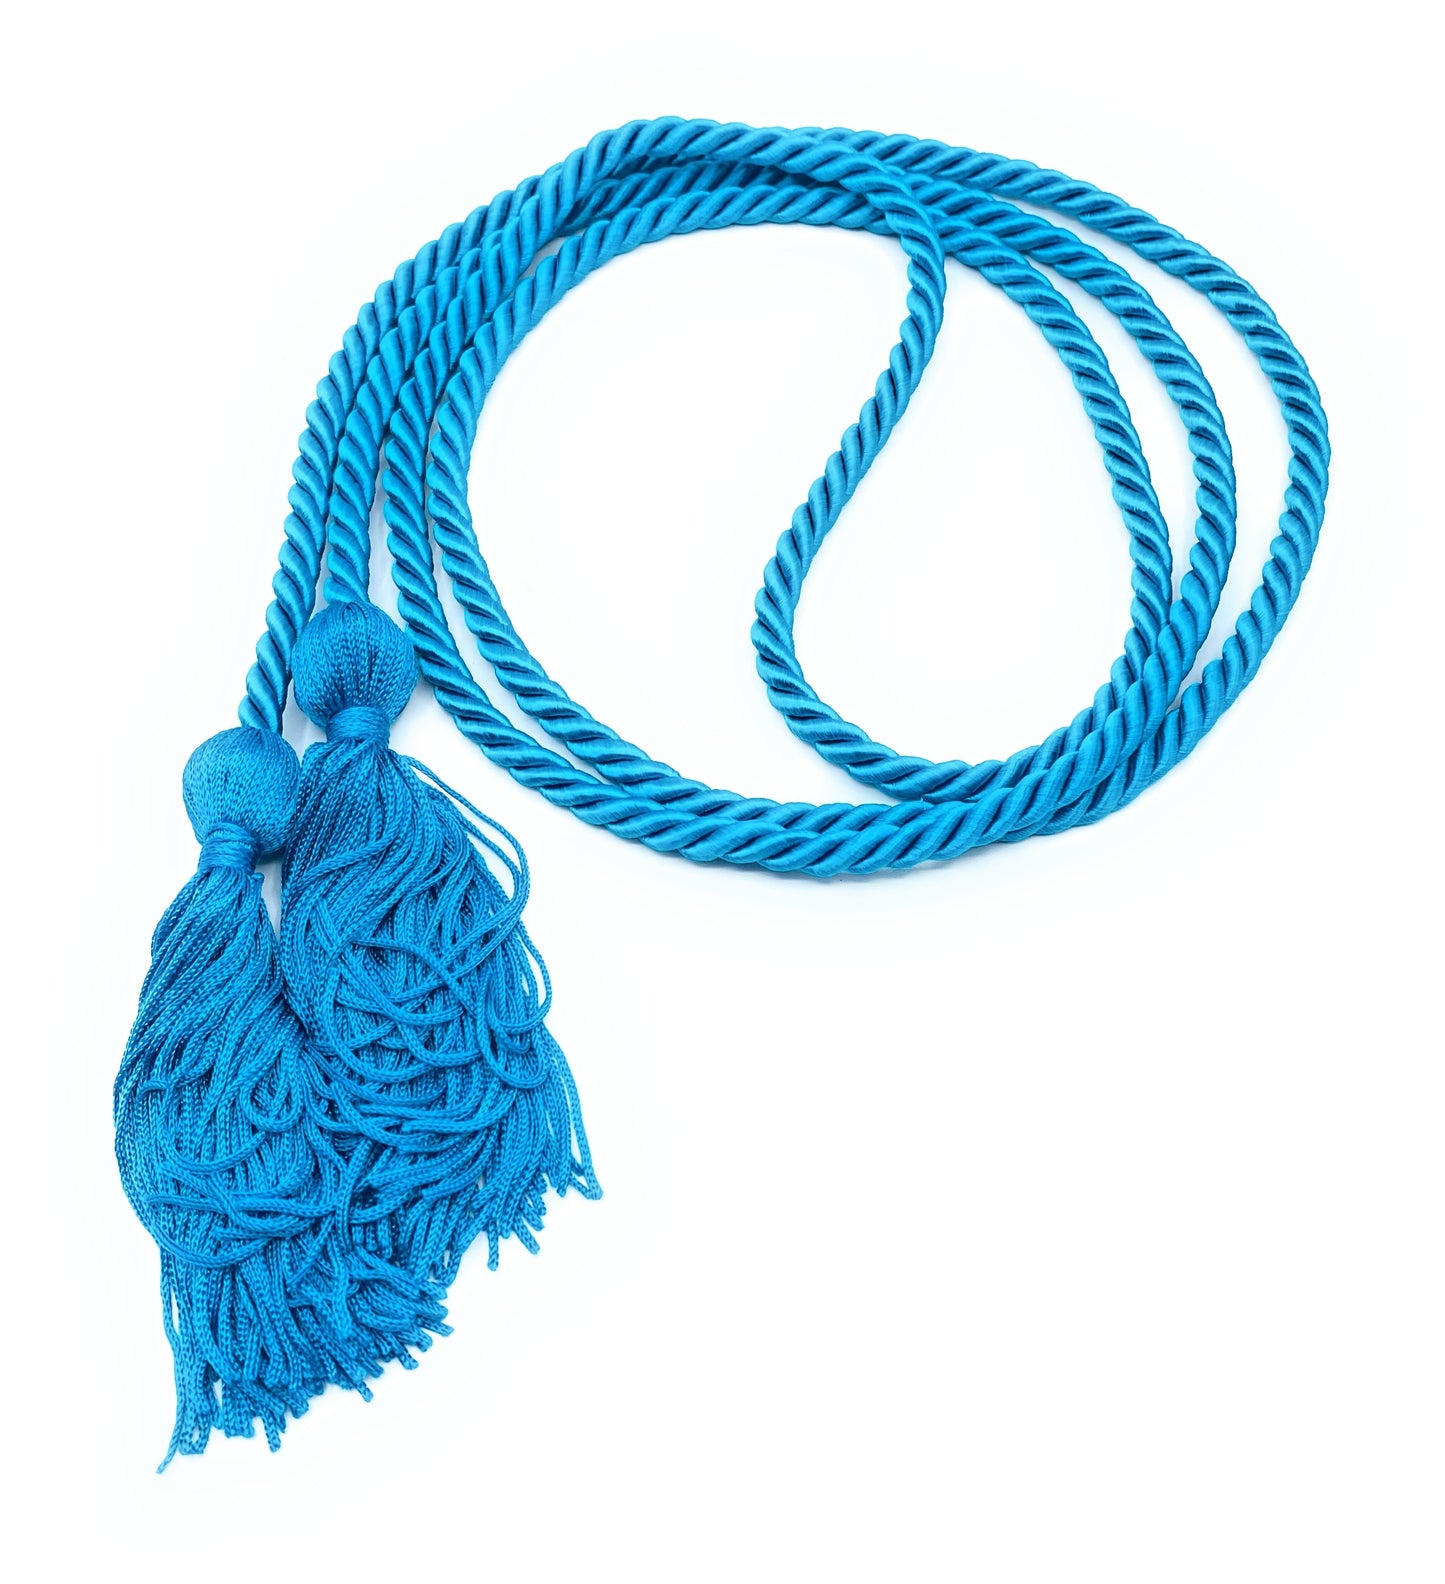 Teal Honor Cords - Honor Cord Source 